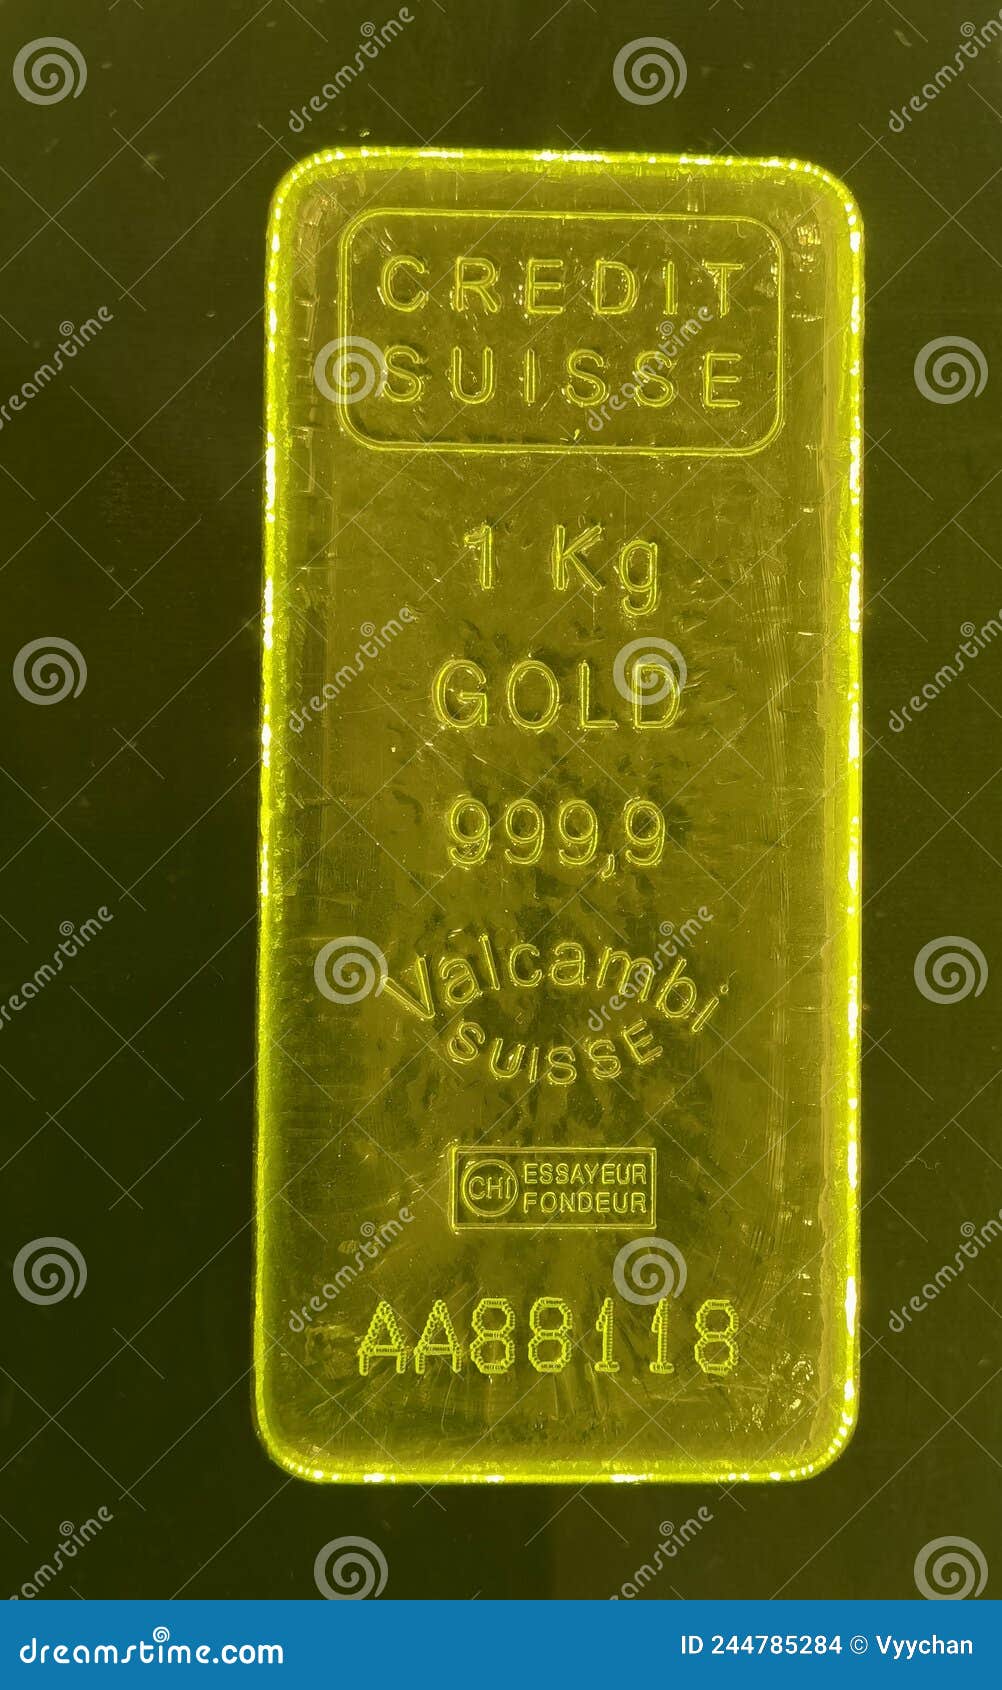 Macao Macau Grand Emperor Hotel Swiss Gold Bar Credit Swisse 999.9 Diamonds  Imperial Kingdom Empire Golden Royal Flooring Treasure Editorial Stock  Image - Image of collection, china: 244785284